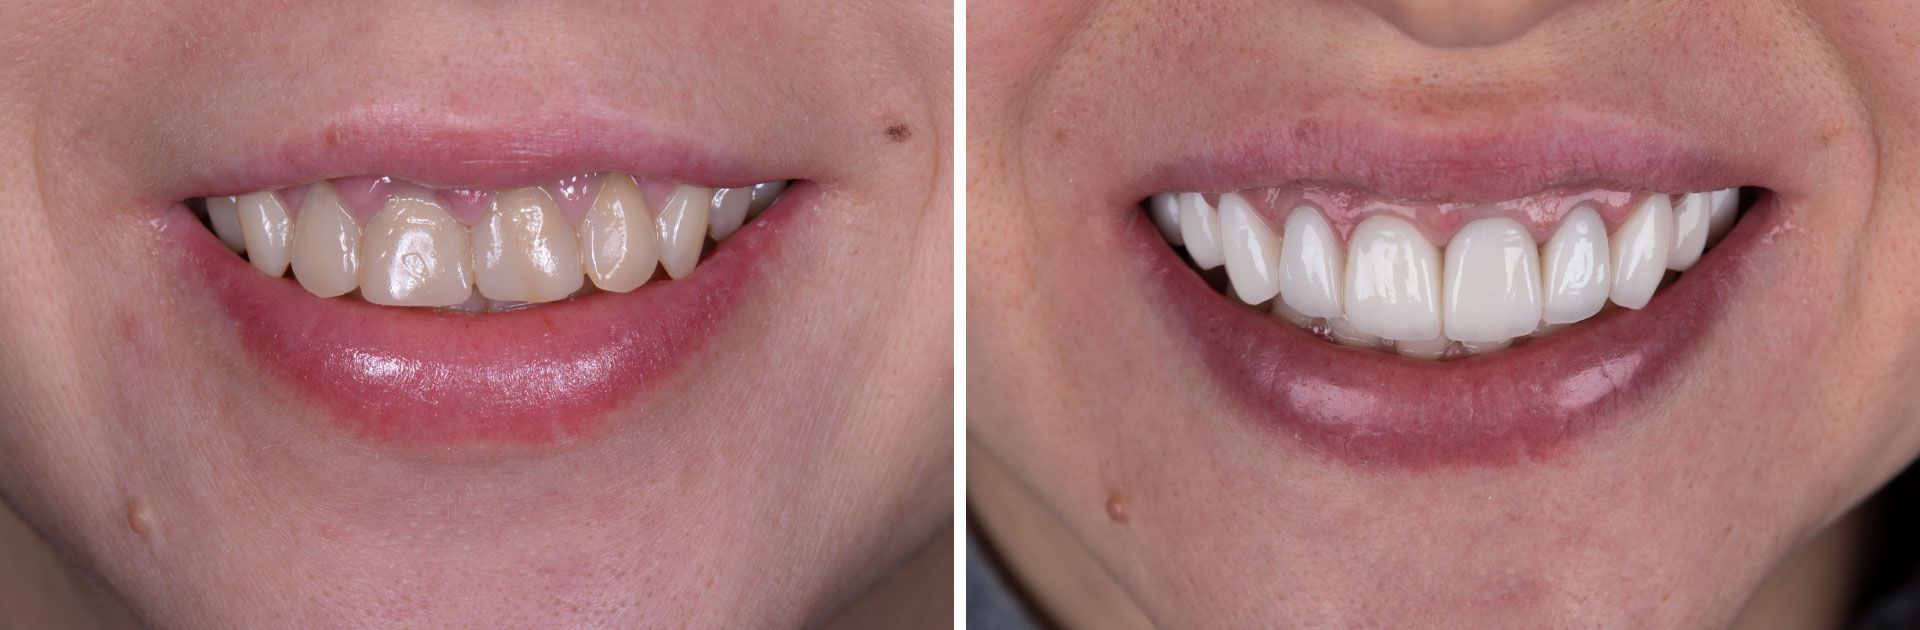 An image of a patient's teeth before and after veneers